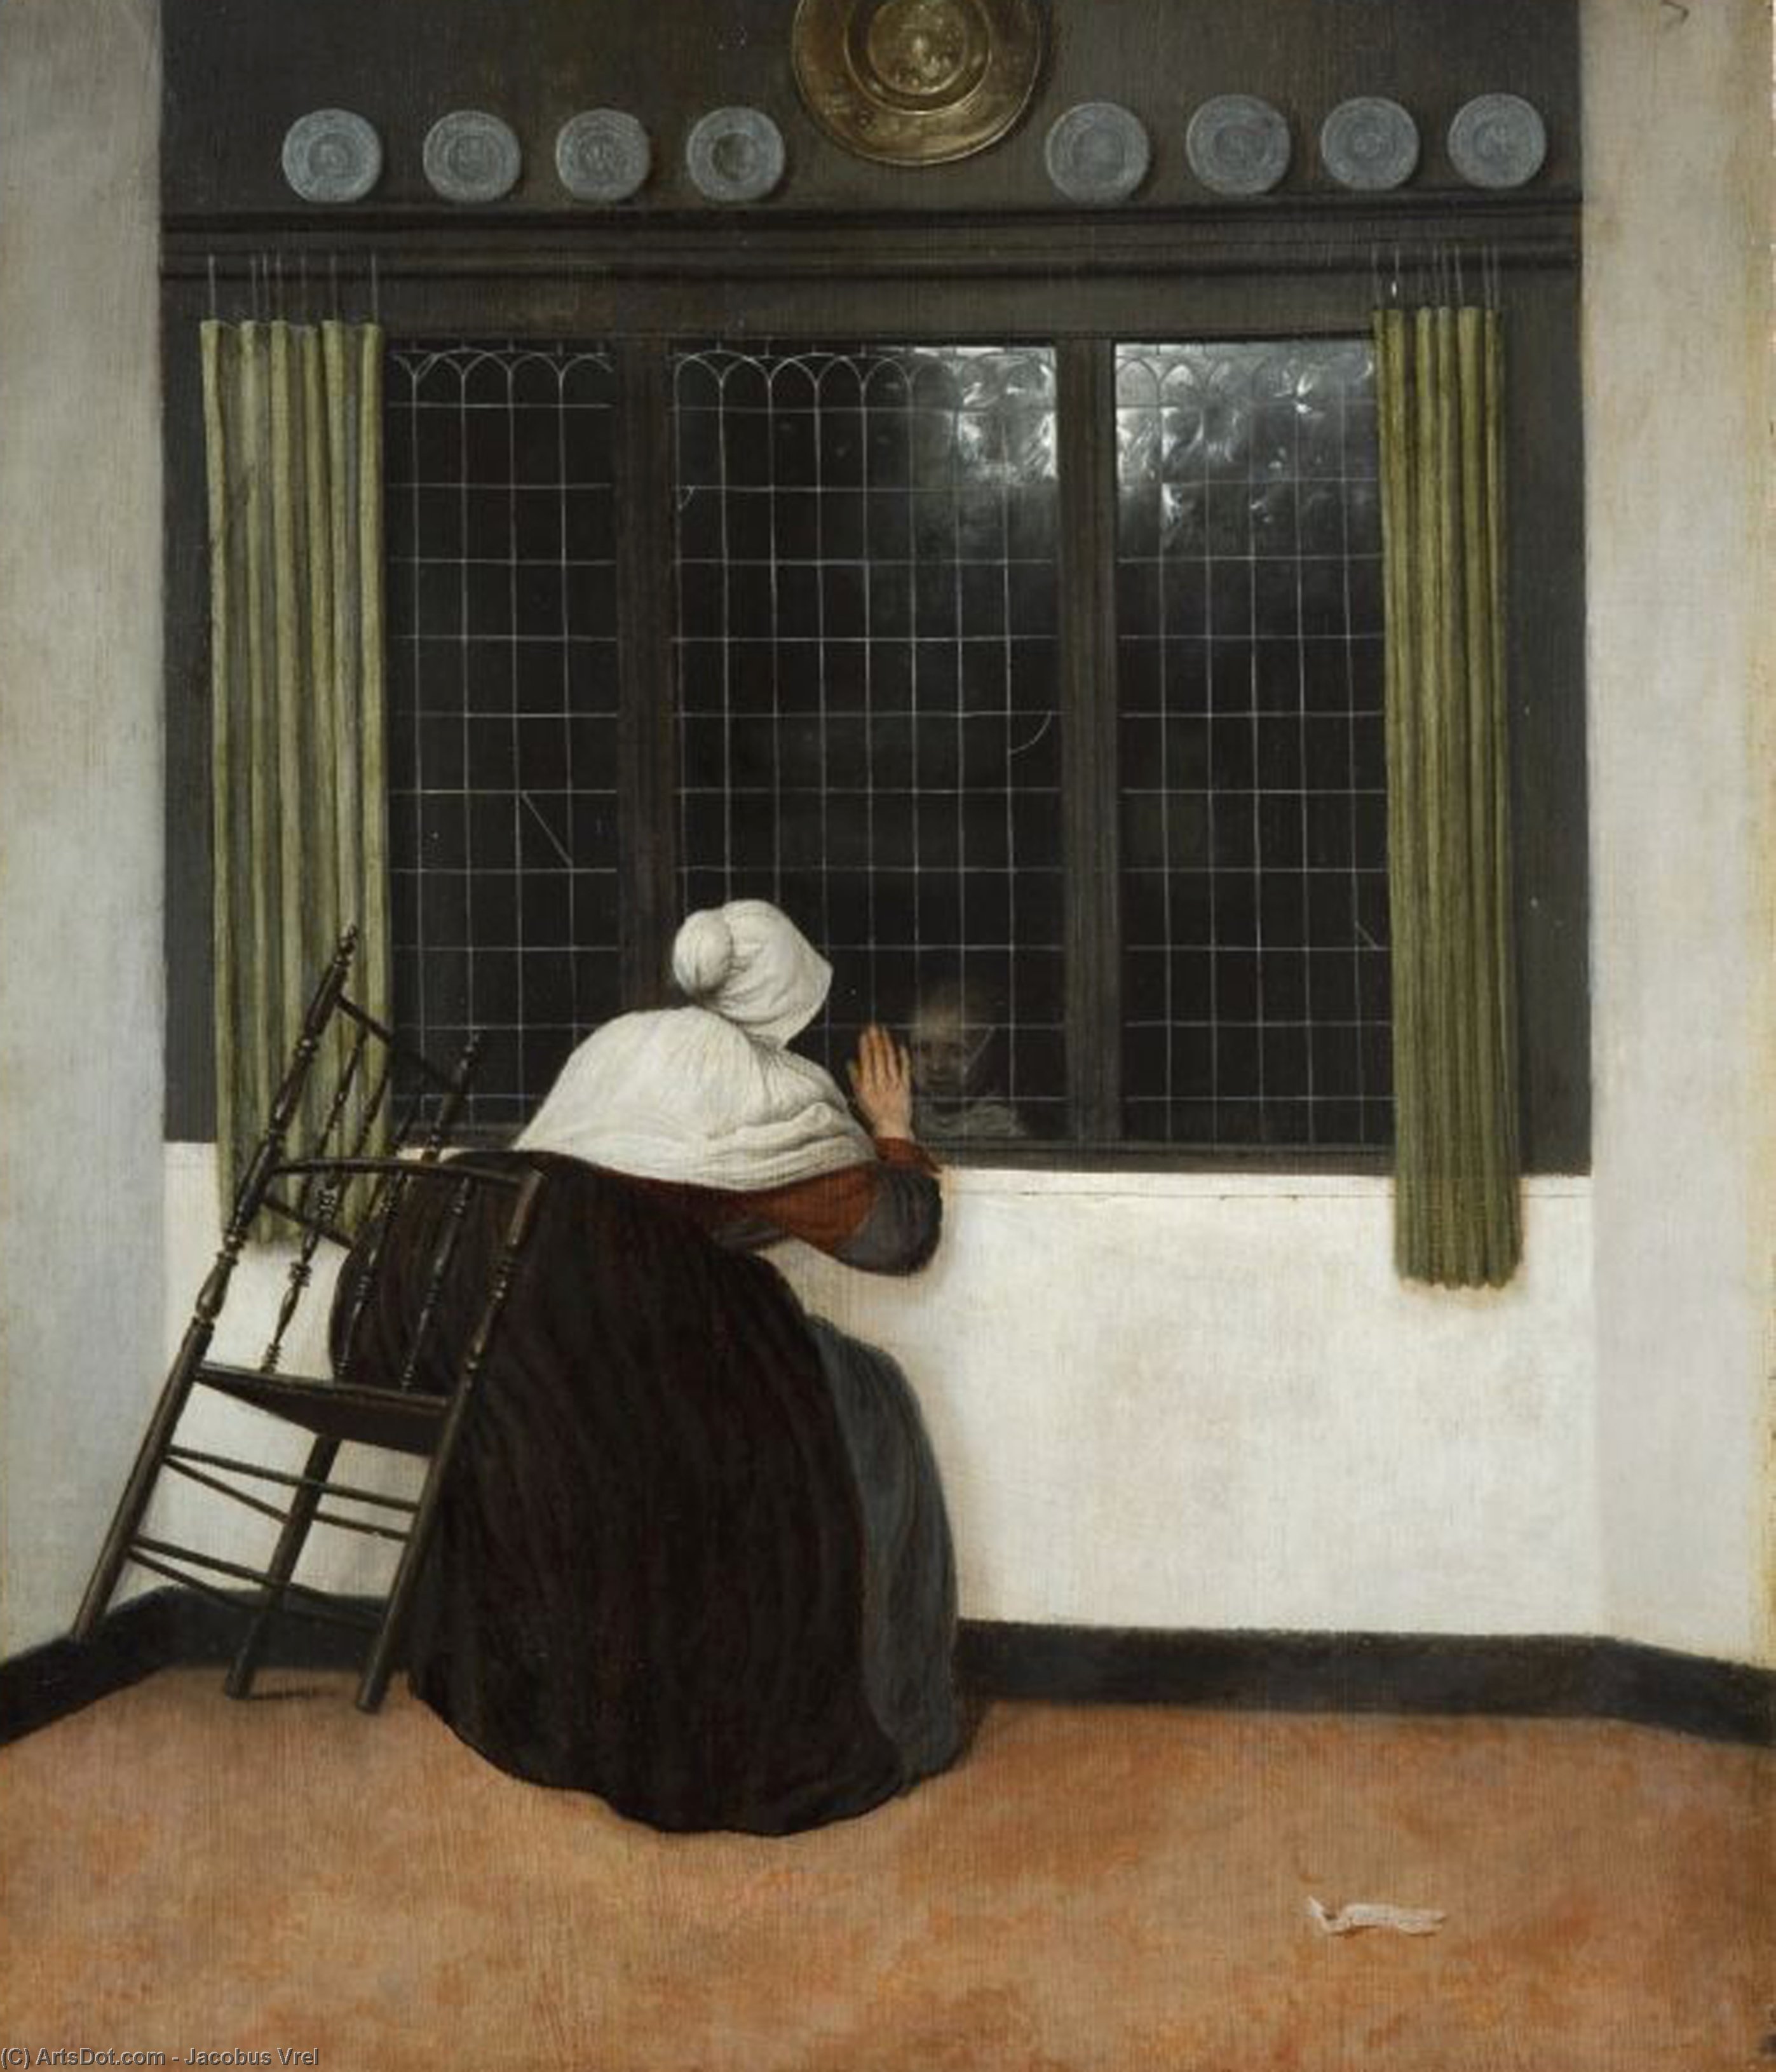 Woman at a Window, Waving at a Girl by Jacobus Vrel - c. 1650 - 47.5 x 39.2 cm Fondation Custodia